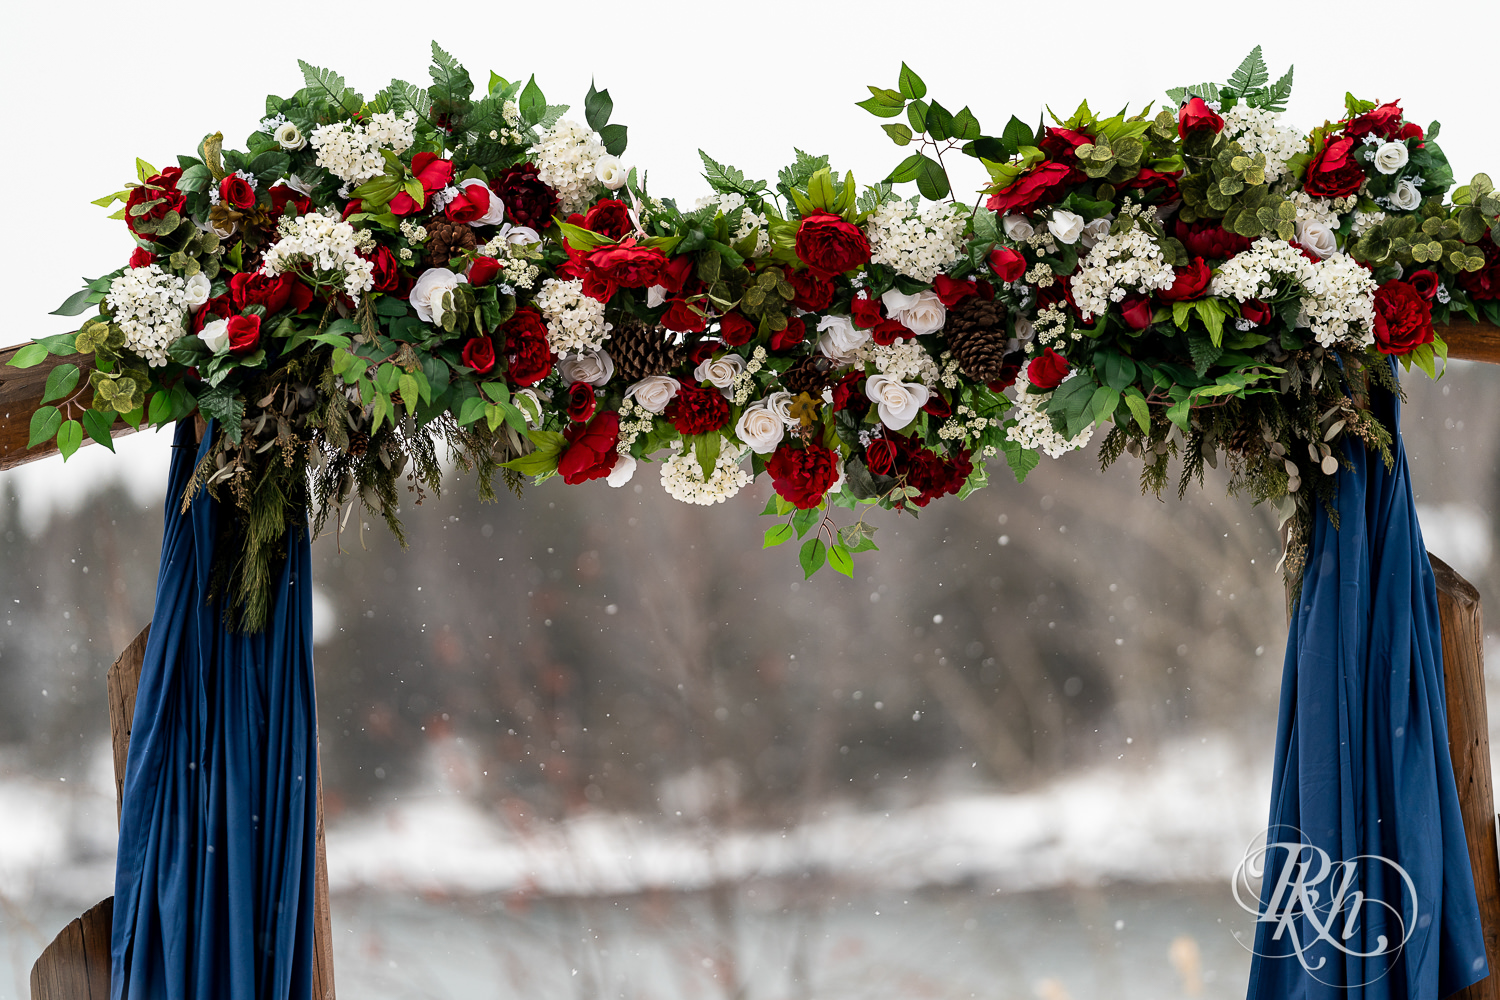 Outdoor winter wedding ceremony setup at Grand Superior Lodge in Two Harbors, Minnesota.